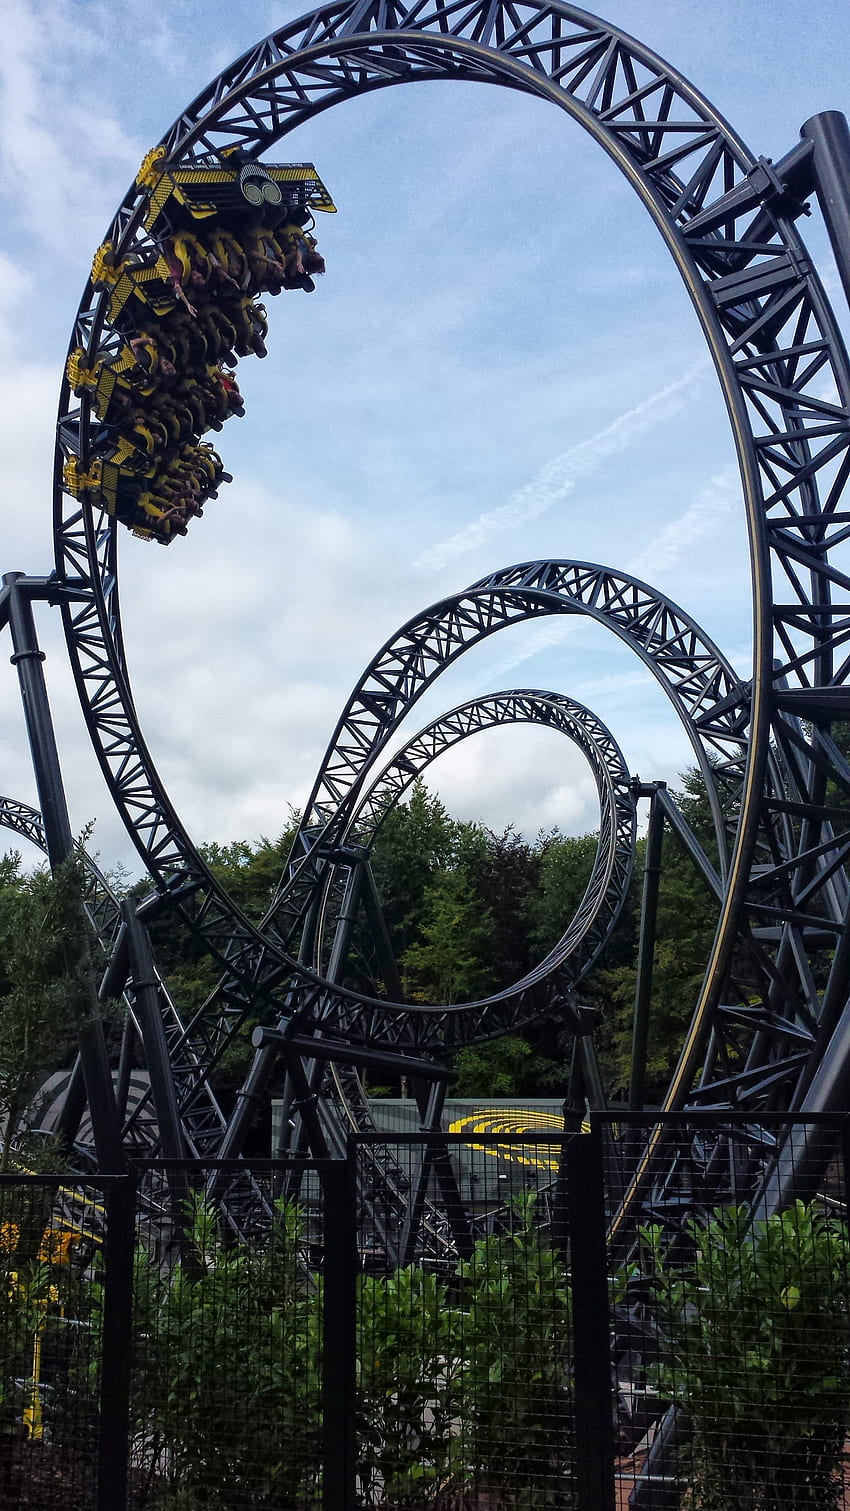 A few thoughts on The Smiler at Alton Towers HD phone wallpaper